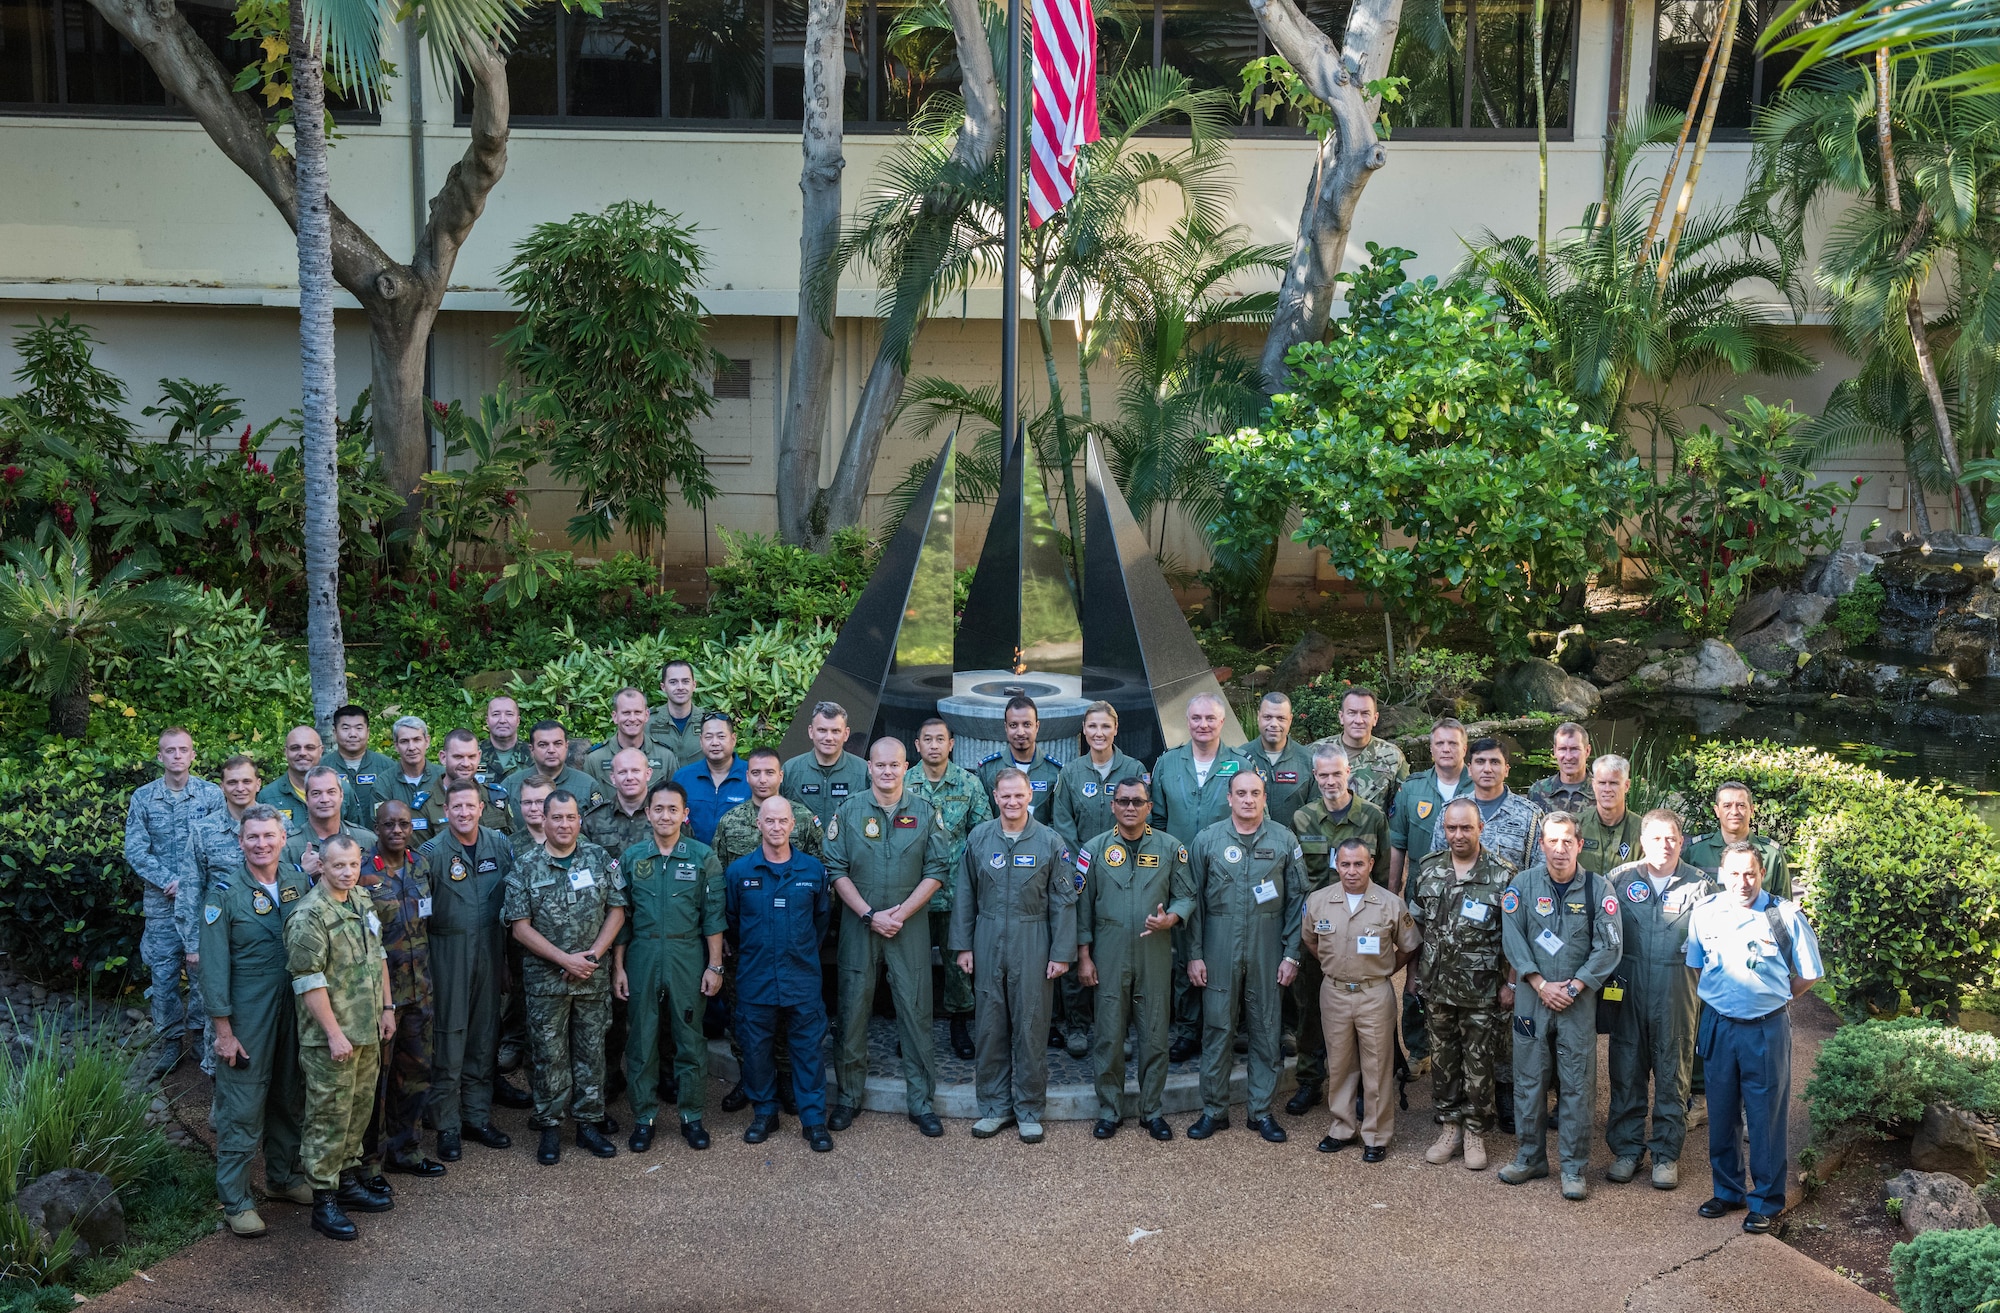 Maj. Gen. Russ Mack, Pacific Air Forces (PACAF) deputy commander, takes a photo with foreign attachés during a tour of Headquarters PACAF, Joint Base Pearl Harbor-Hickam, Hawaii, October 23, 2018.